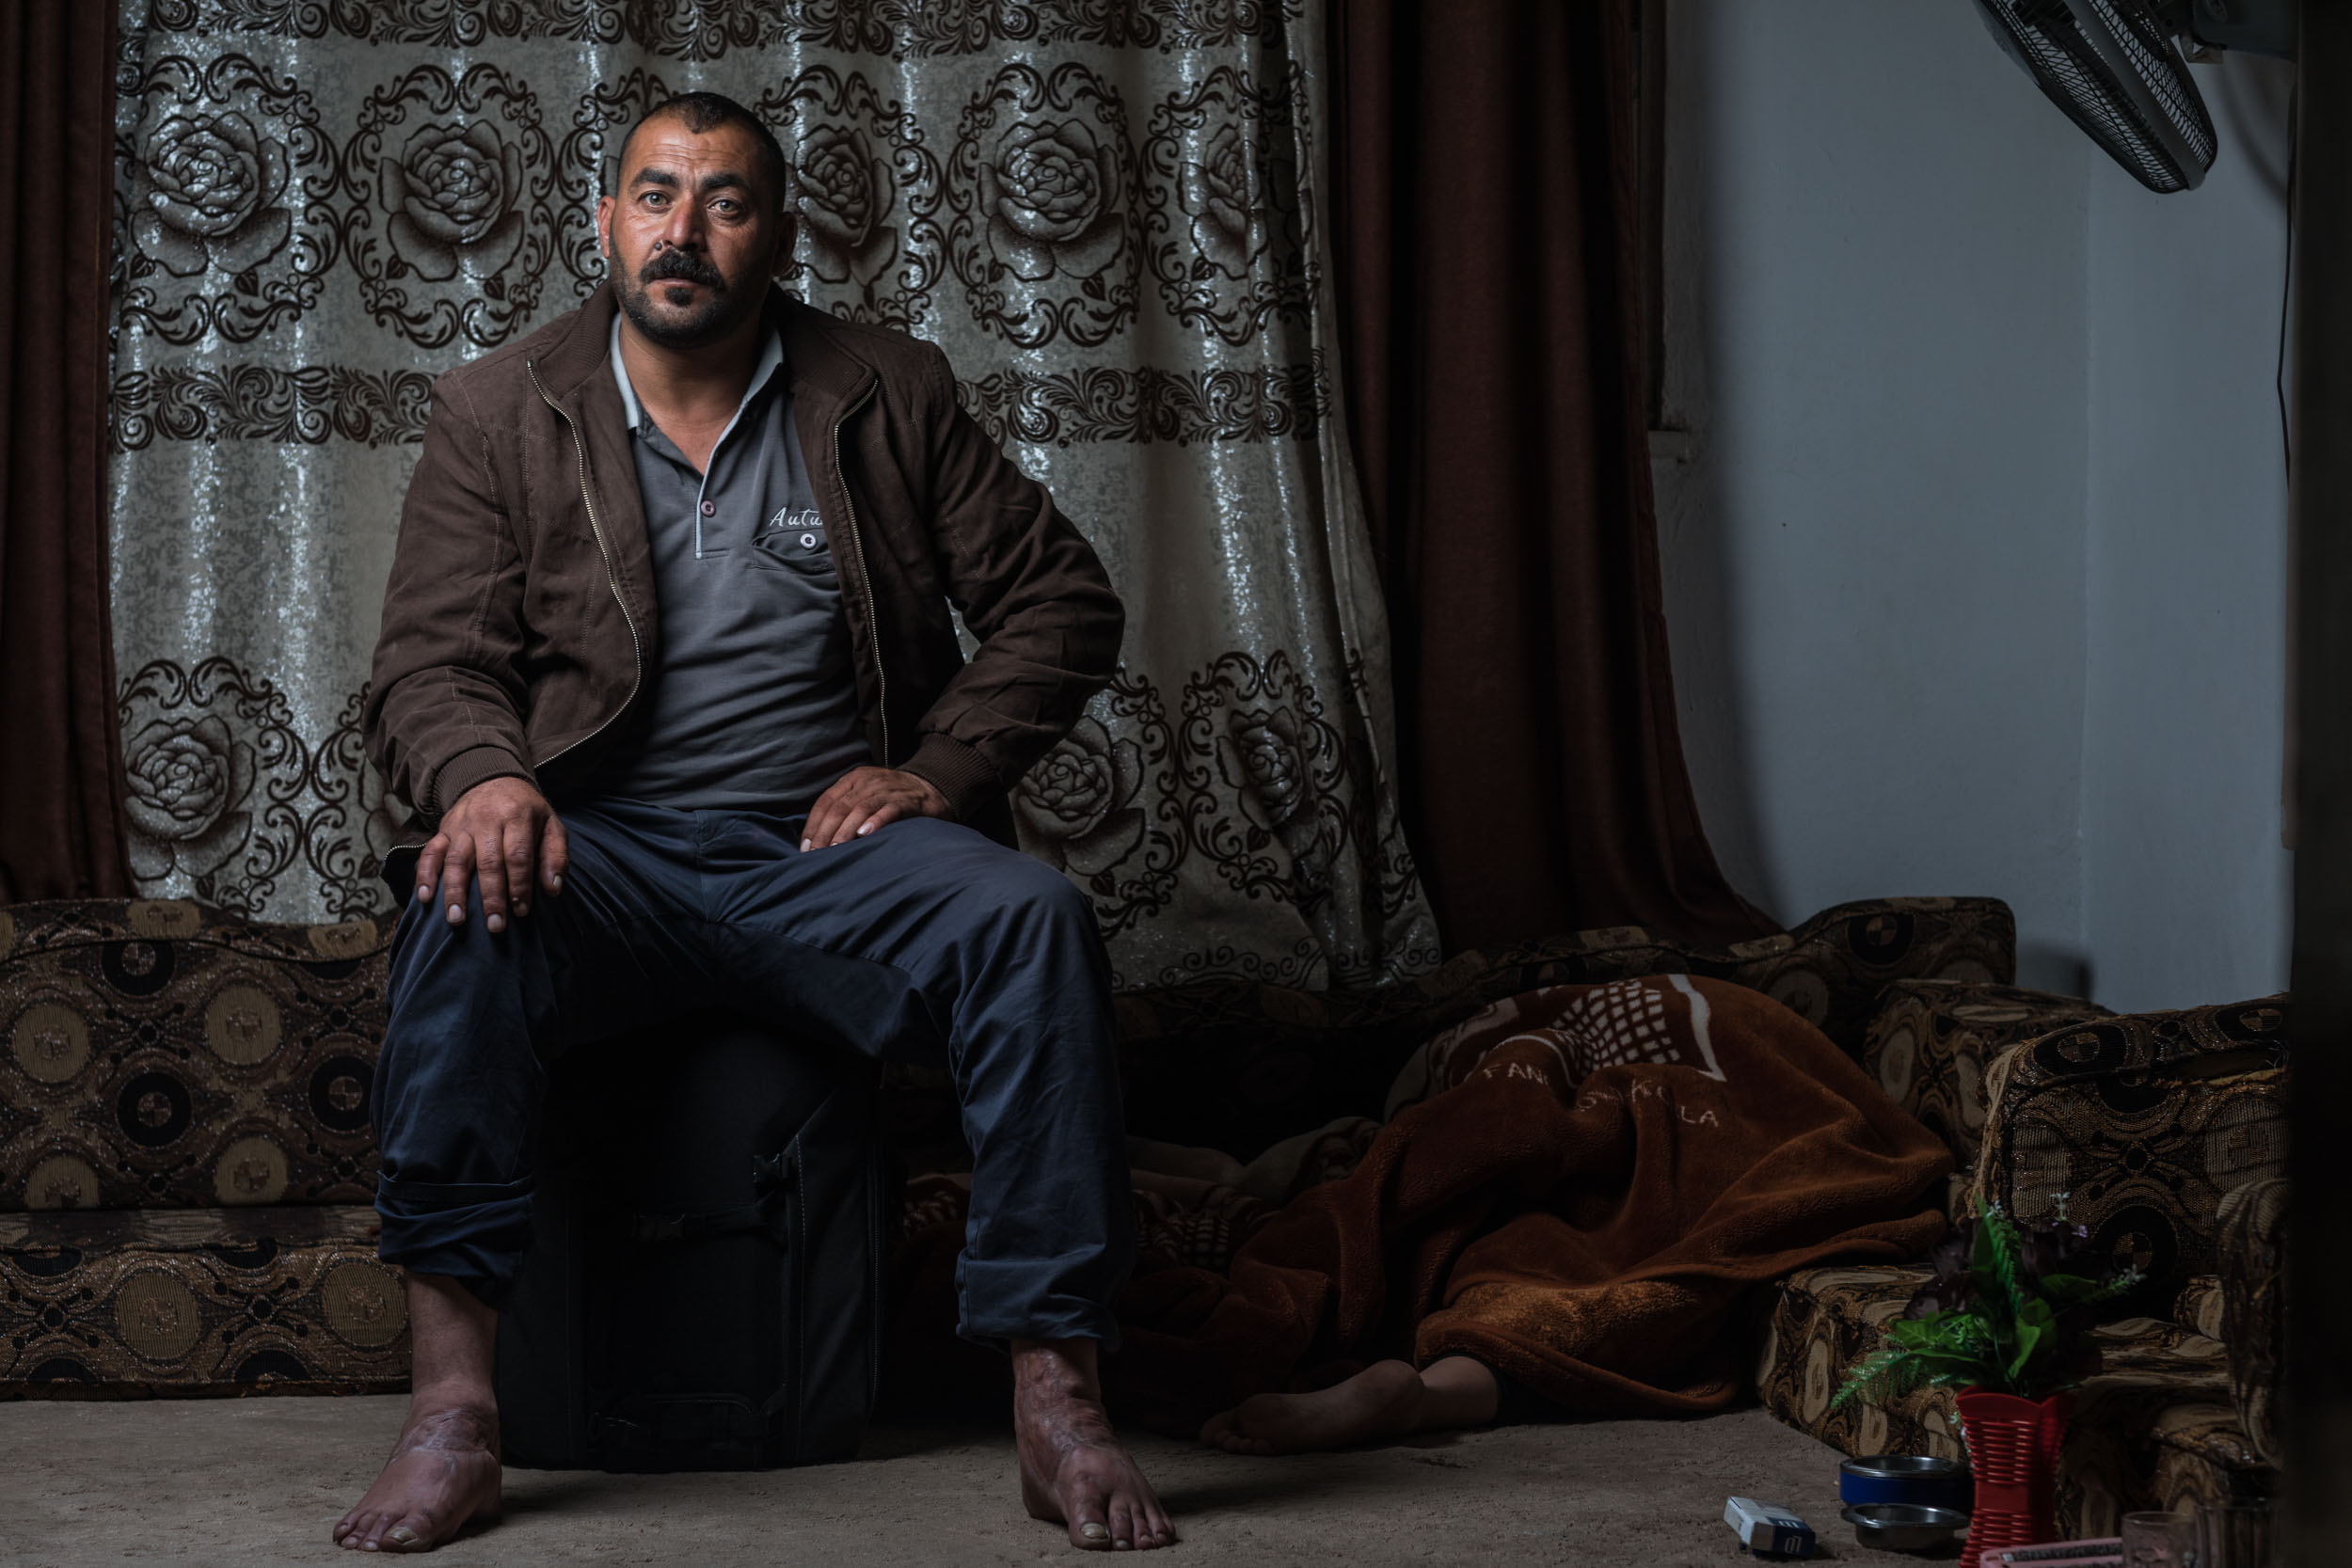 The story of Mohammed. Survivor of torture from Syria.